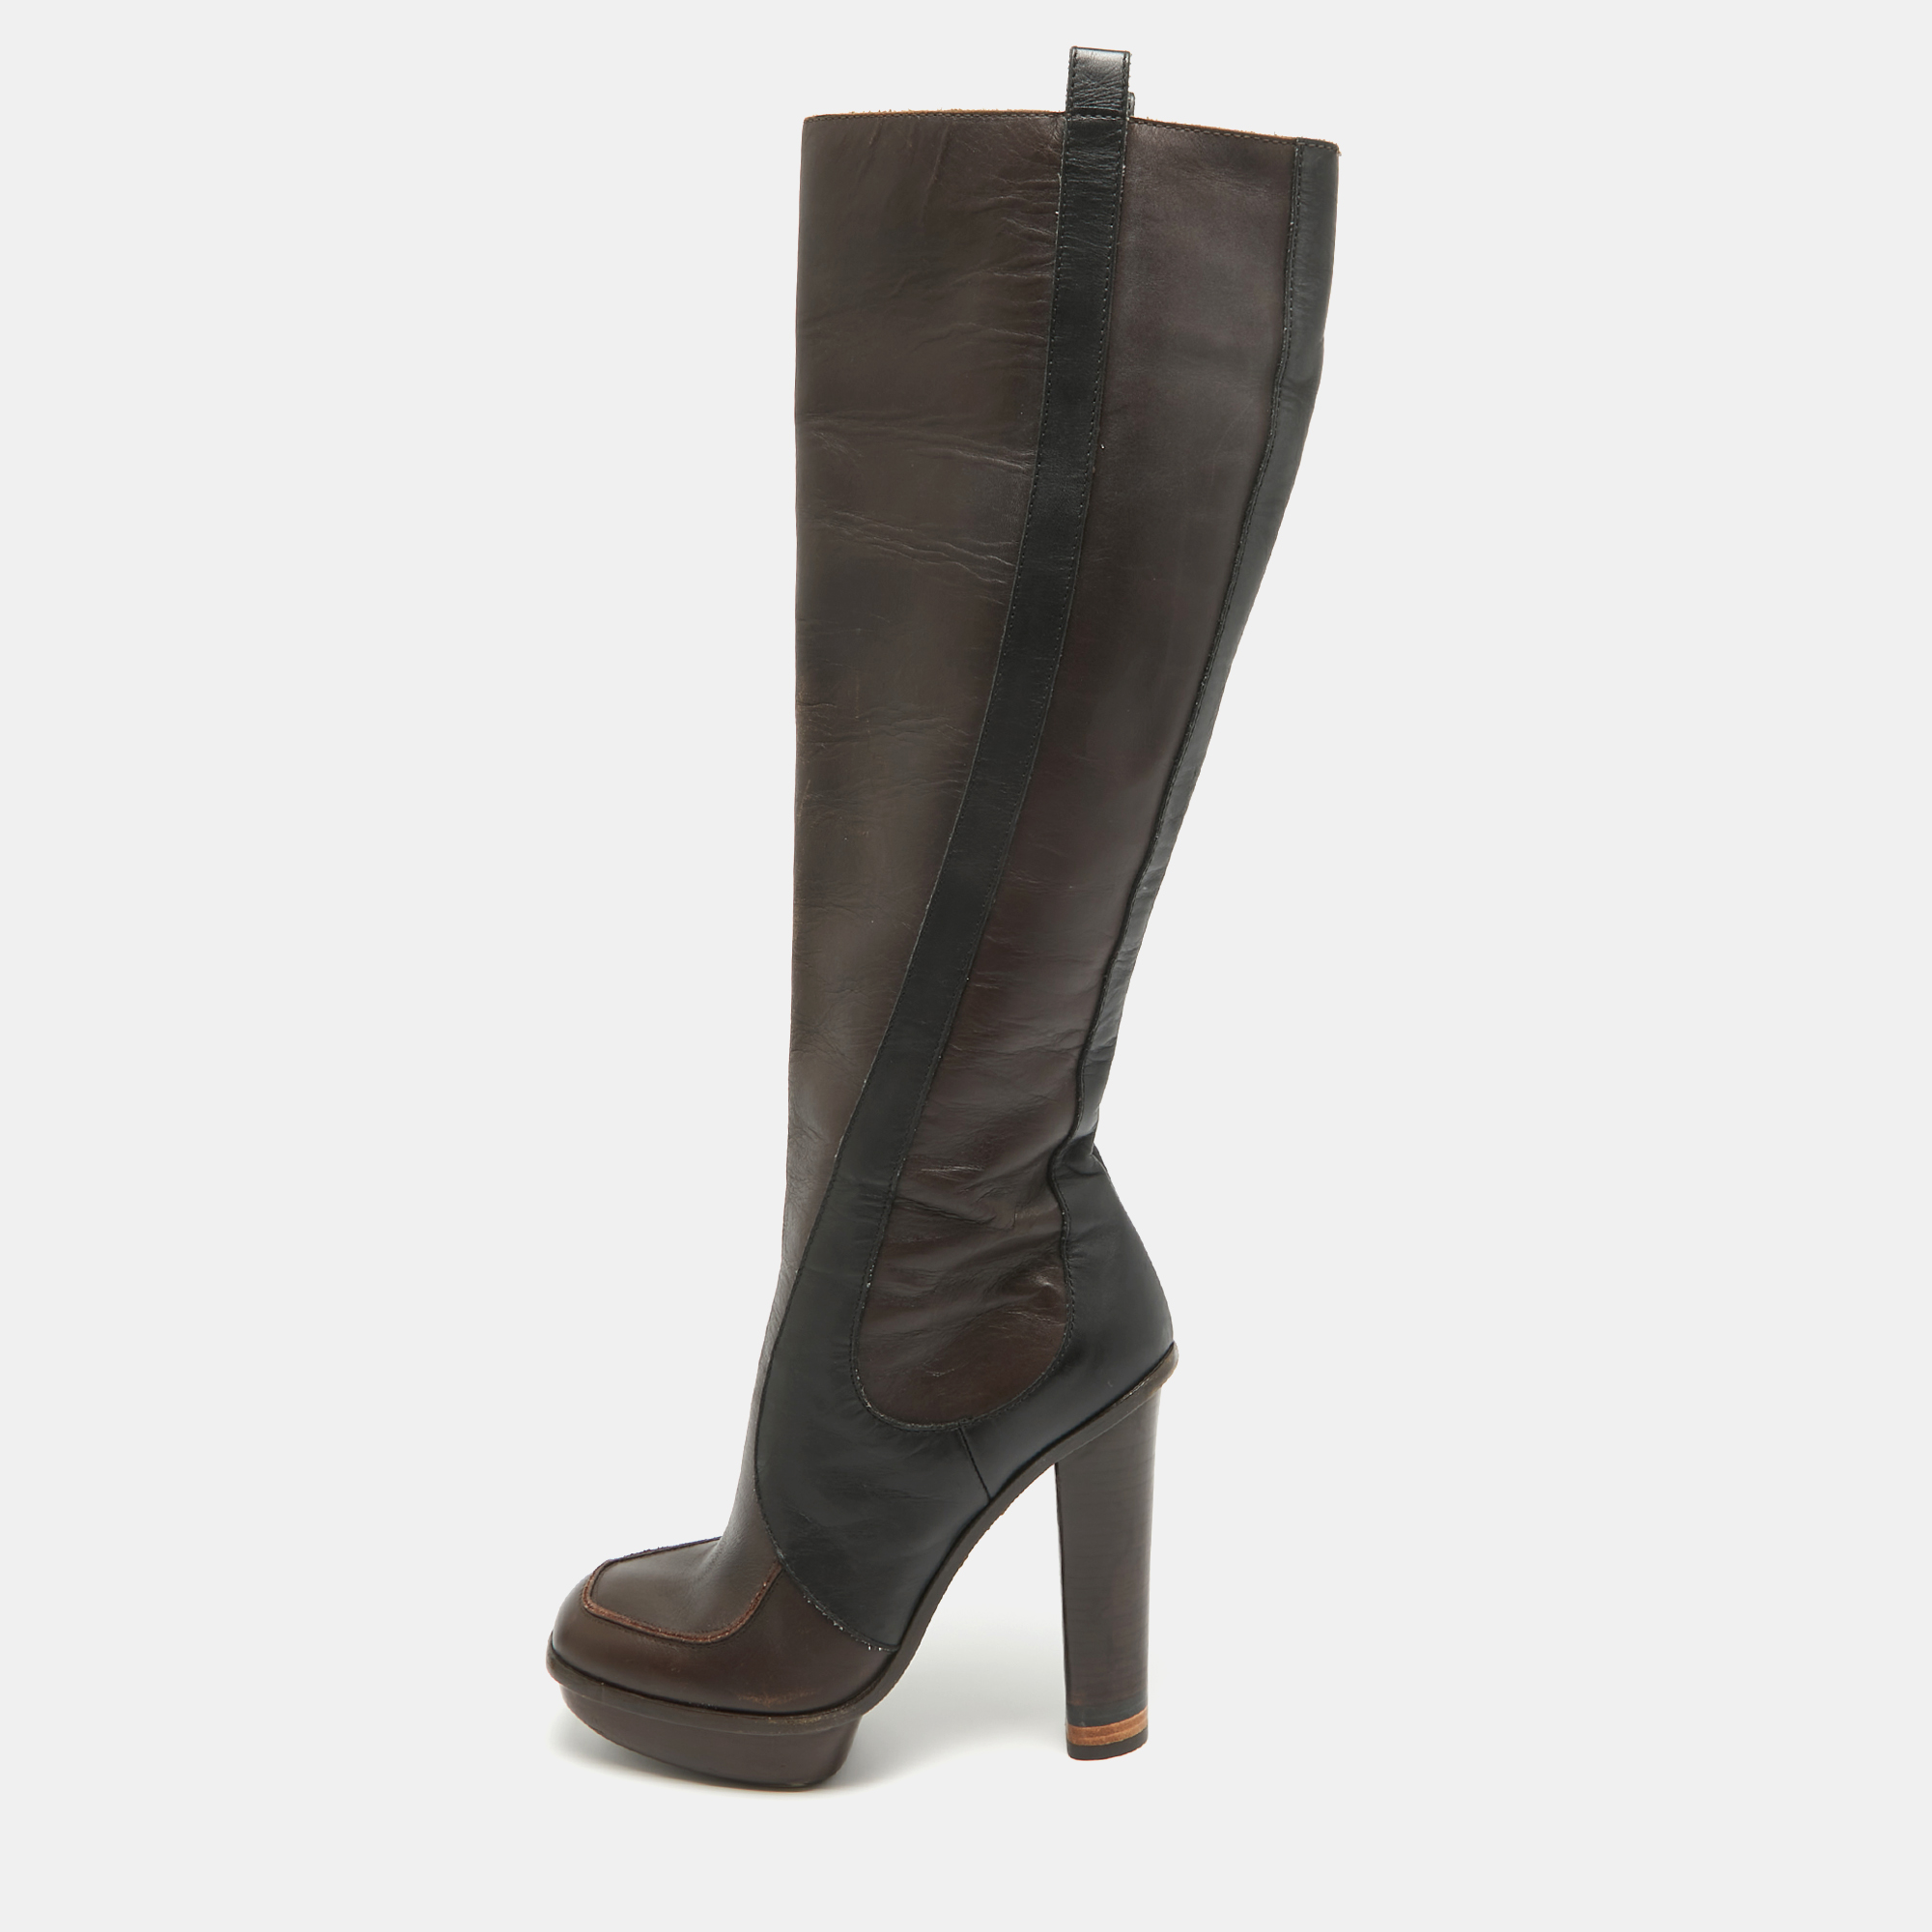 Gucci brown leather platform knee length boots size 36